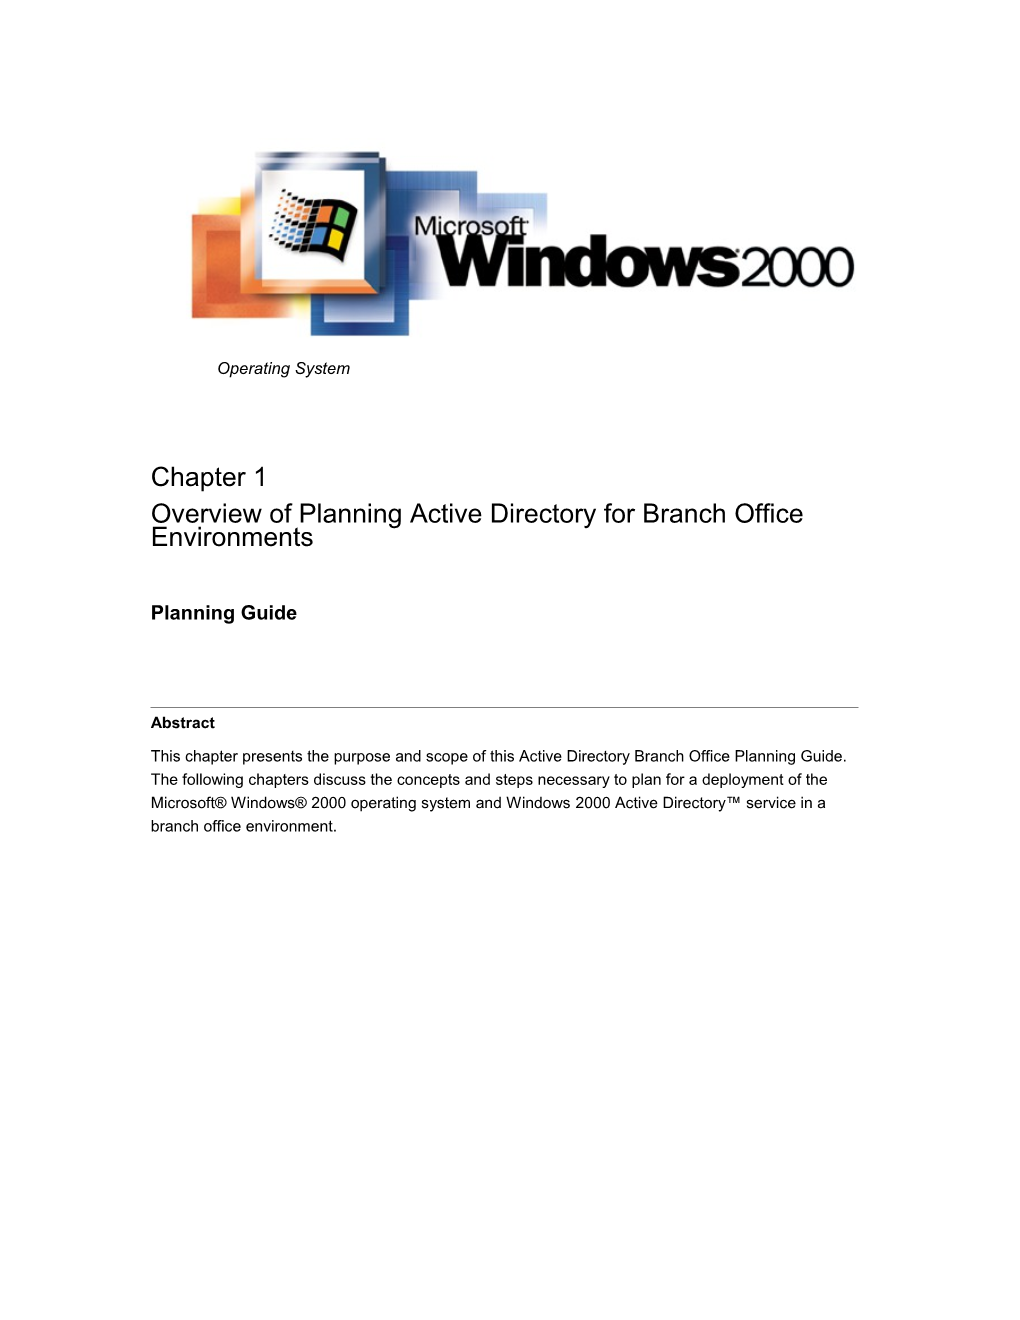 Overview of Planning Active Directory for Branch Office Environments